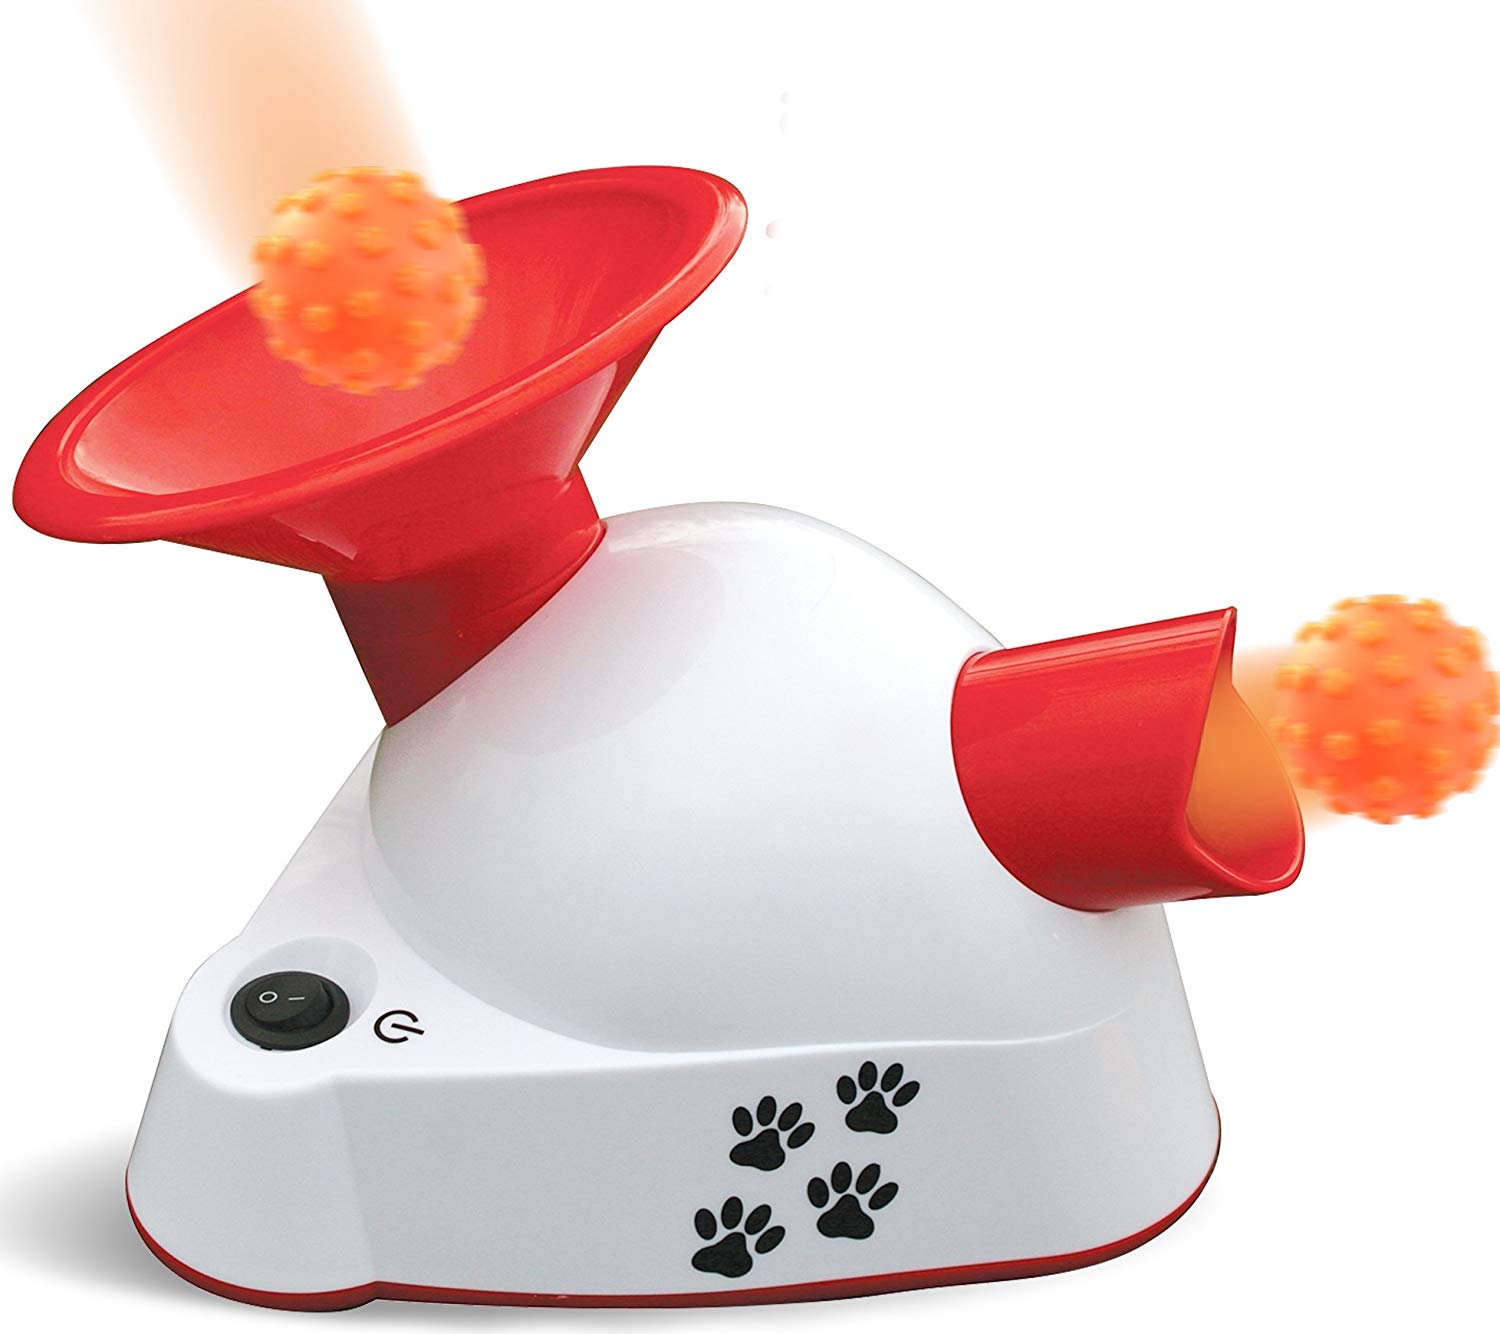 Kleeger Automatic Dog Ball Fetcher Talking Trainer Toy | Dog Ball Launcher / Thrower For Indoor Or Outdoor Use| Interactive Ball Fetching Machine with 3 Small Balls. For Small Dogs & Puppies Only.